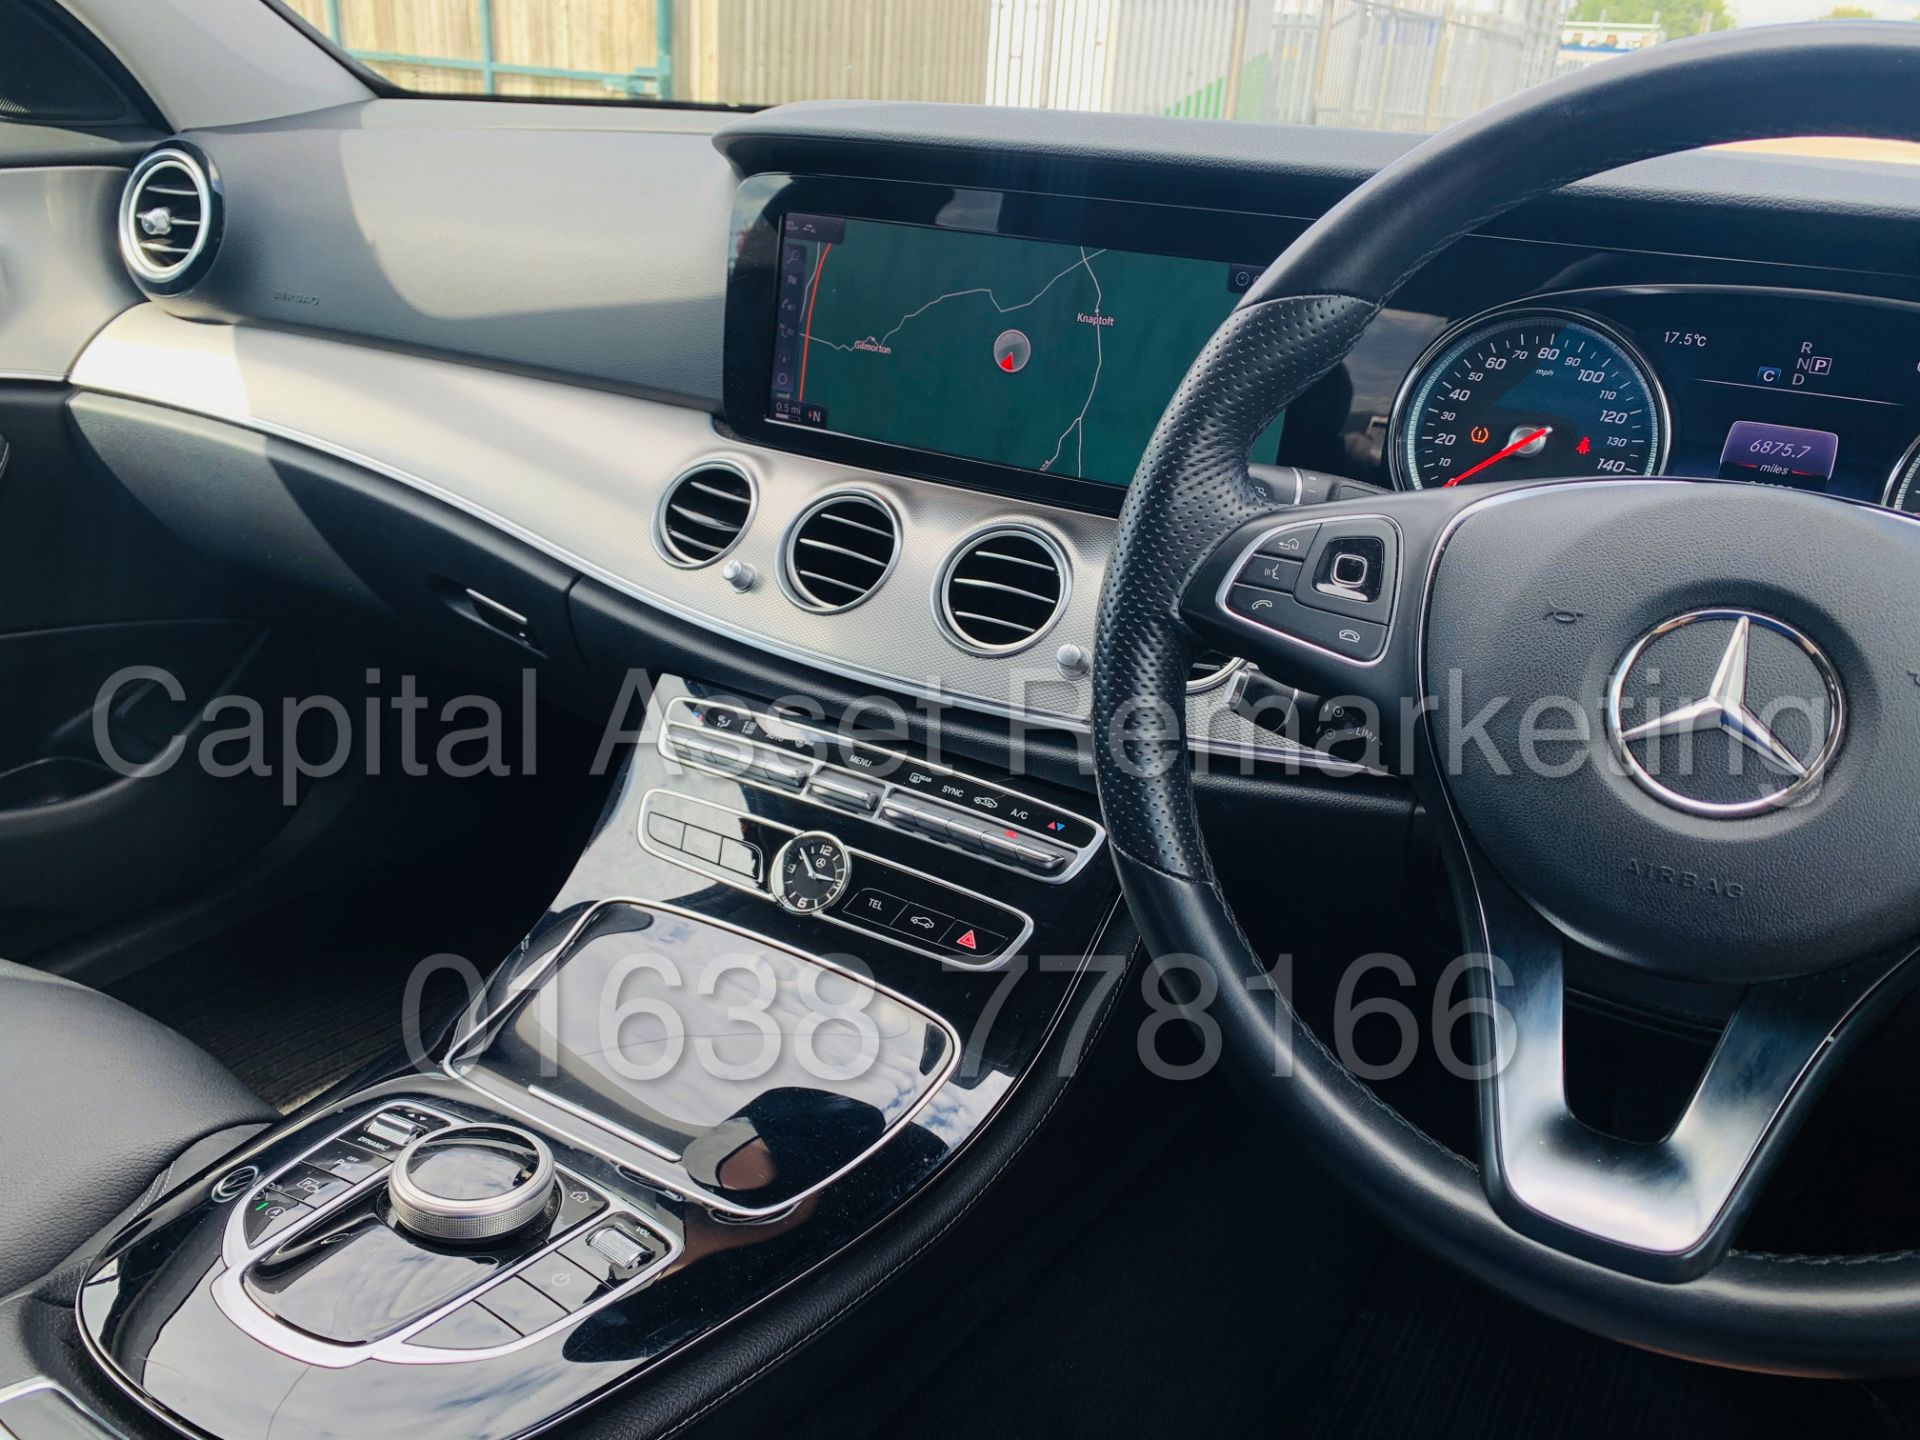 (On Sale) MERCEDES-BENZ E220D *SALOON* (2018 - NEW MODEL) '9-G TRONIC AUTO - LEATHER - SAT NAV' - Image 43 of 56